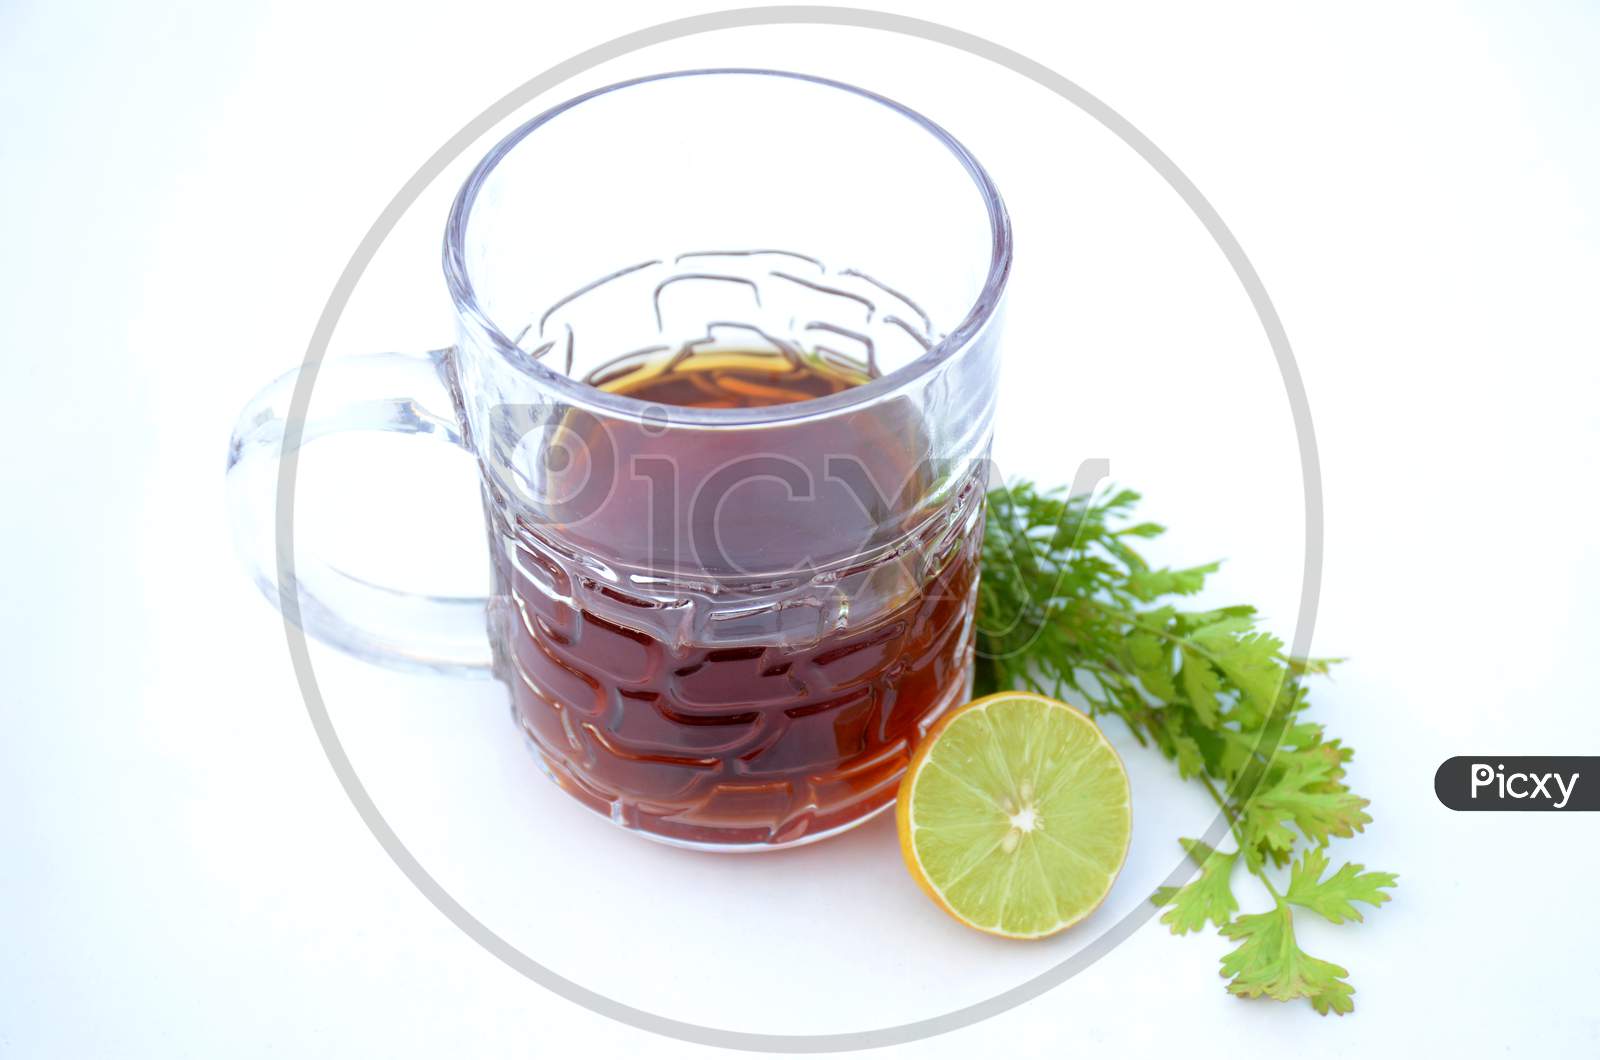 The Black Lemon Tea In The Glass Cup With Anise And Lemon On The White Background.